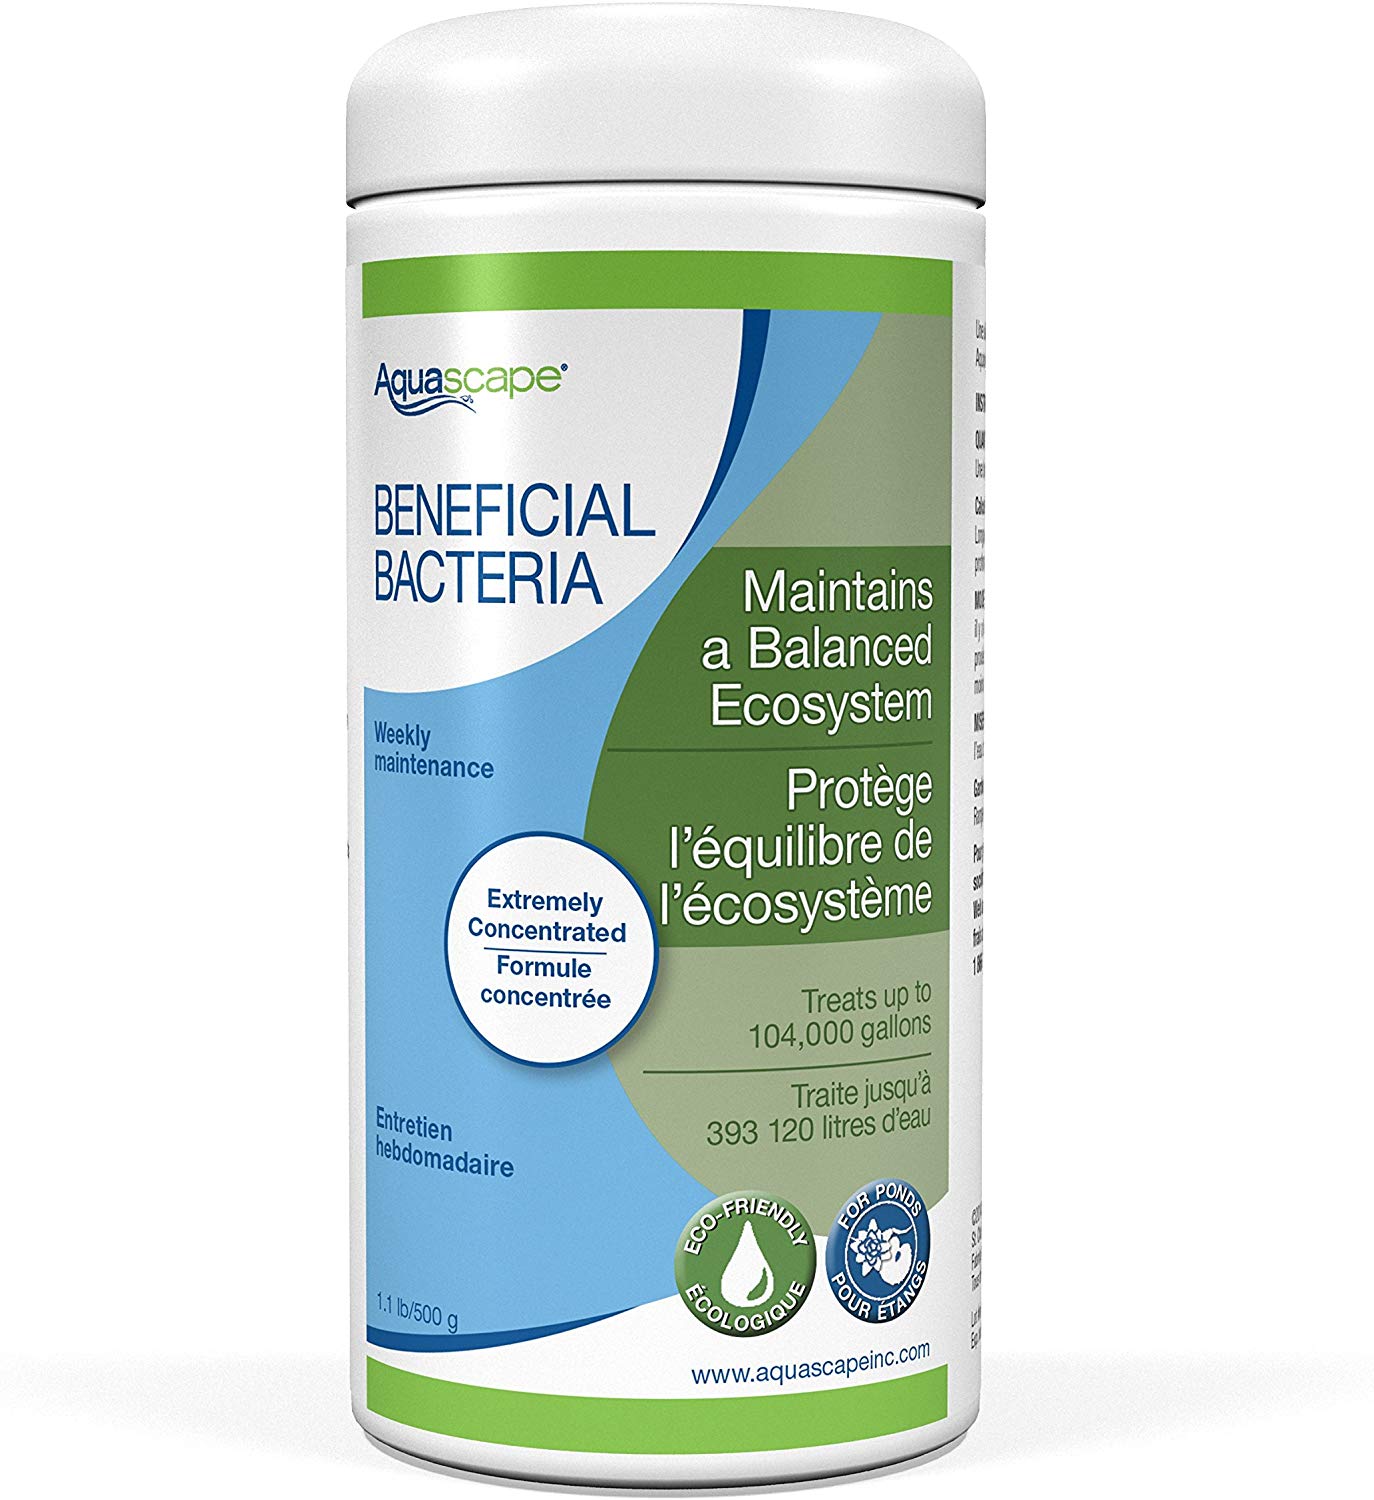 Aquascape Dry Beneficial Bacteria for Pond and Water Features